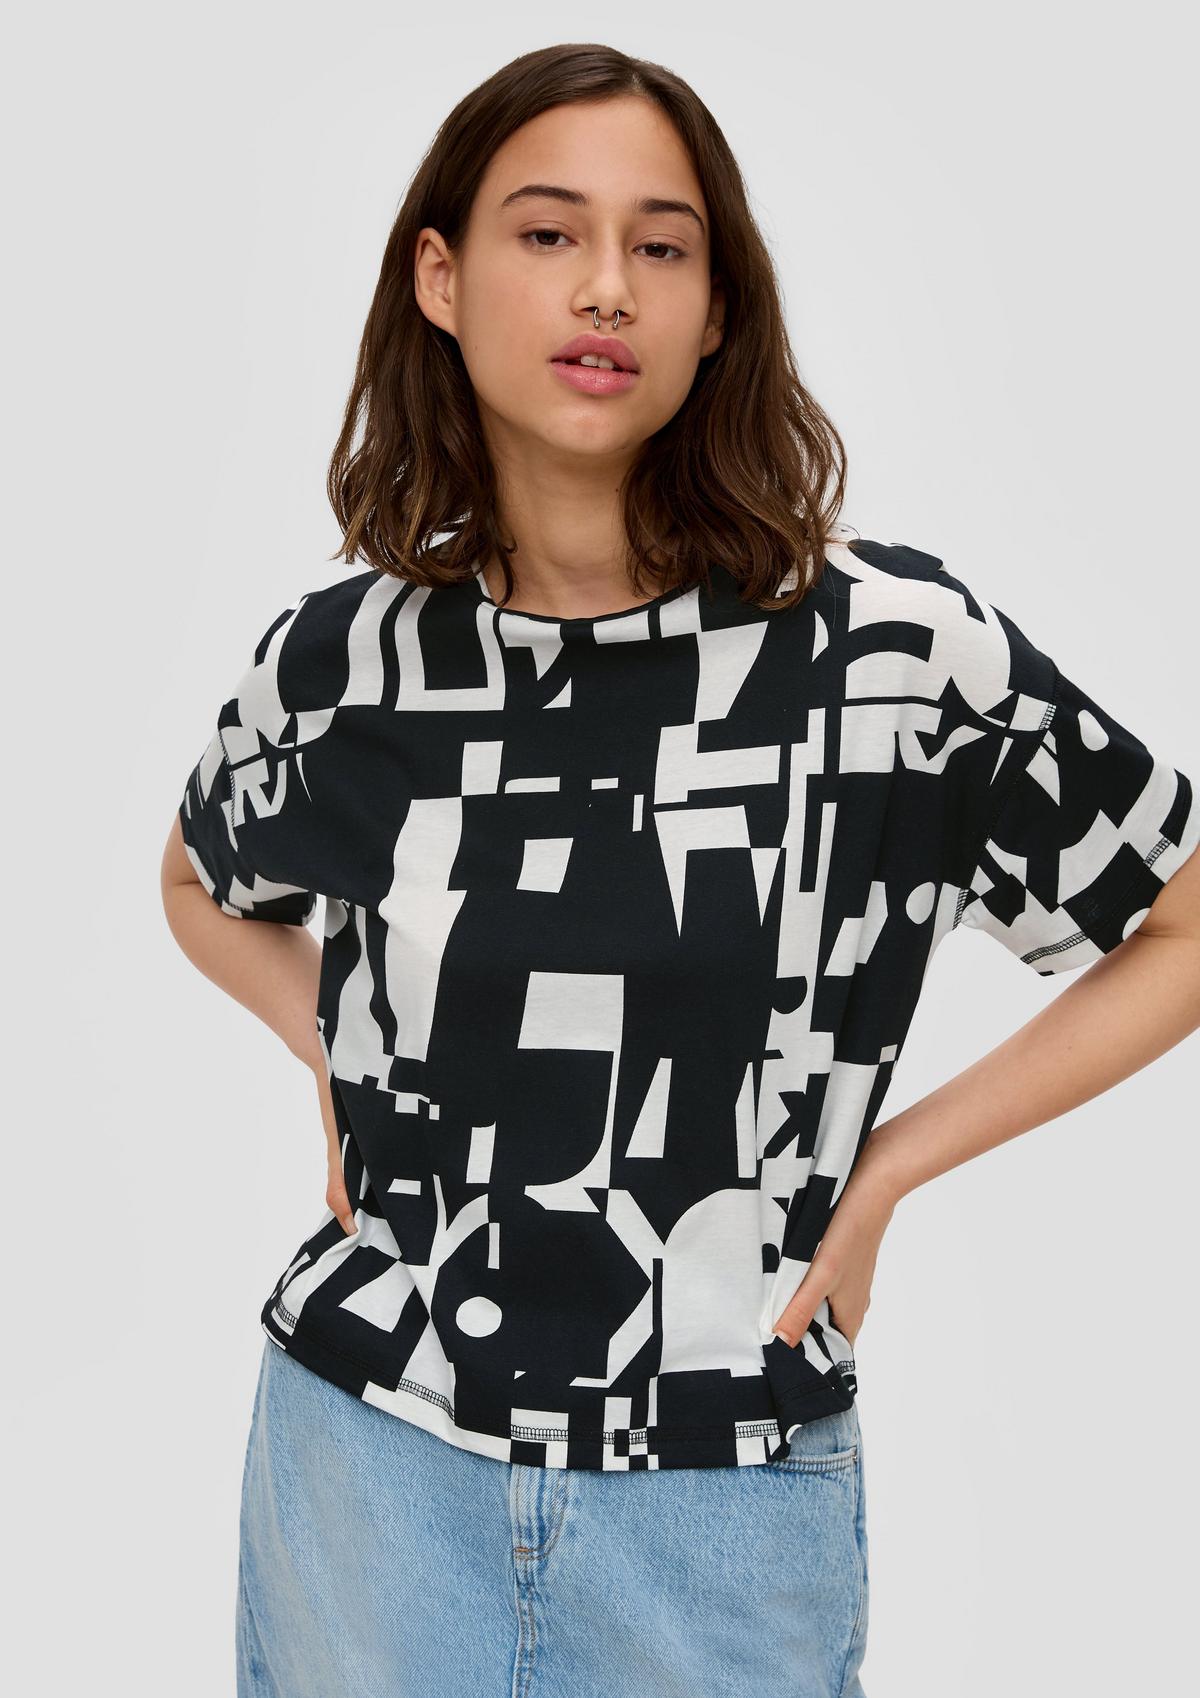 T-shirt in a loose fit with an all-over print